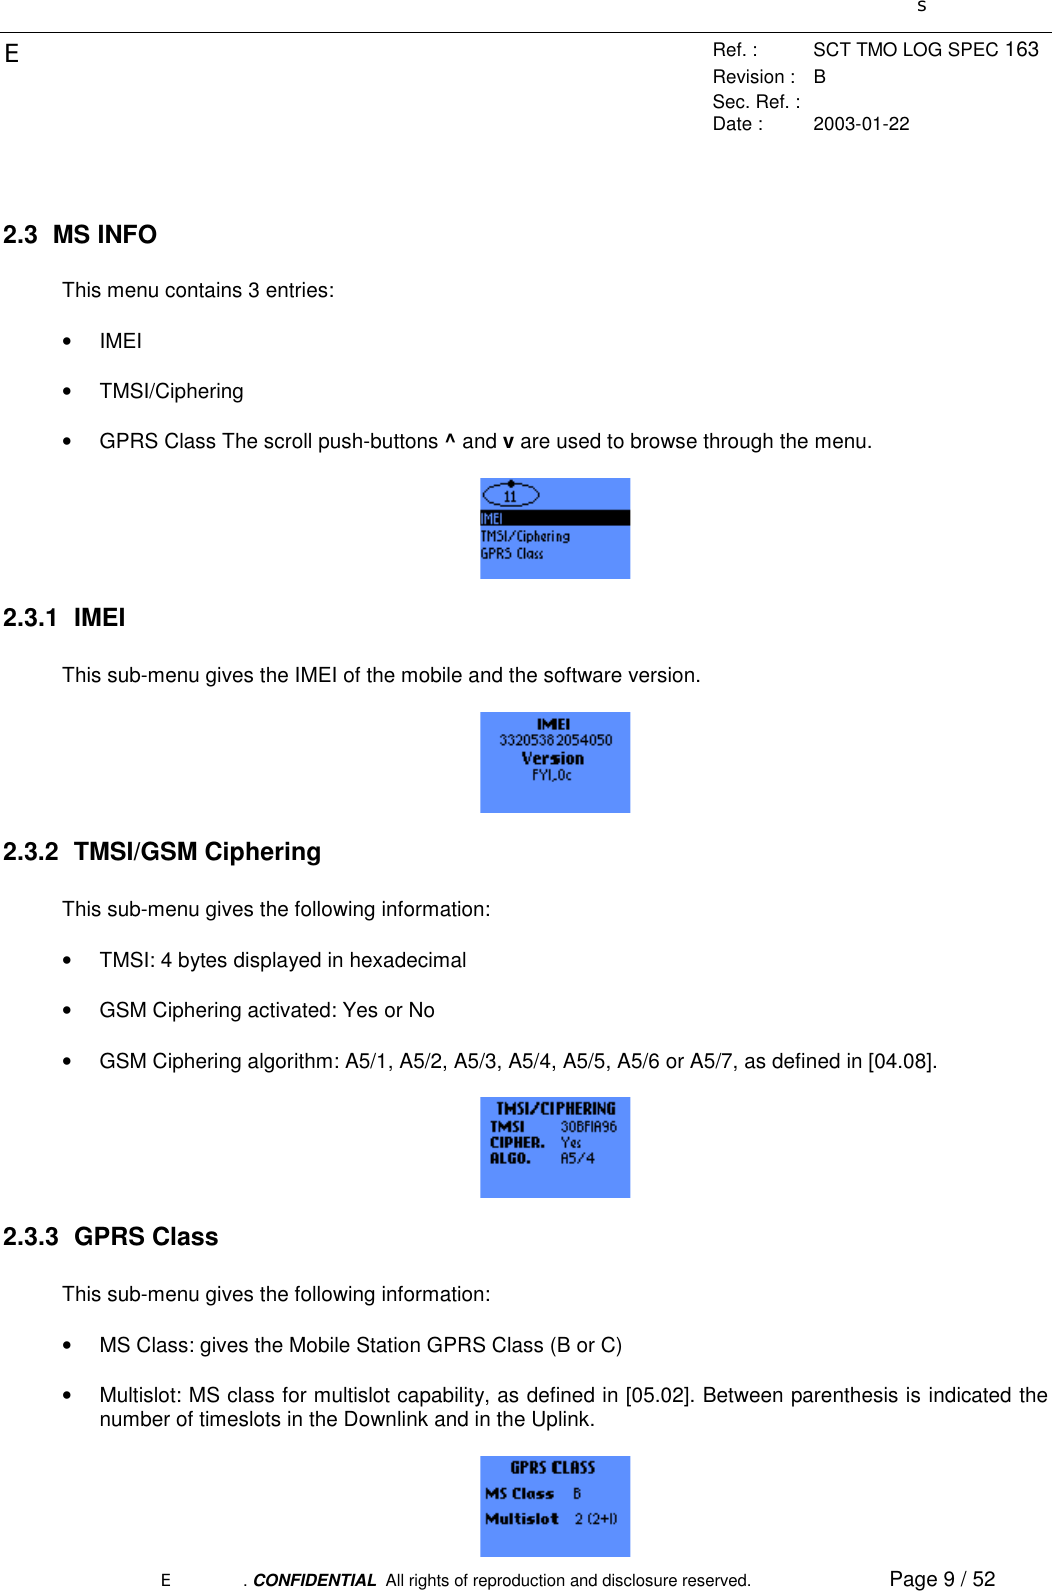 sERef. : SCT TMO LOG SPEC 163Revision : BSec. Ref. :Date : 2003-01-22E. CONFIDENTIAL  All rights of reproduction and disclosure reserved. Page 9 / 522.3 MS INFOThis menu contains 3 entries:• IMEI• TMSI/Ciphering•  GPRS Class The scroll push-buttons ^ and v are used to browse through the menu.2.3.1 IMEIThis sub-menu gives the IMEI of the mobile and the software version.2.3.2 TMSI/GSM CipheringThis sub-menu gives the following information:•  TMSI: 4 bytes displayed in hexadecimal•  GSM Ciphering activated: Yes or No•  GSM Ciphering algorithm: A5/1, A5/2, A5/3, A5/4, A5/5, A5/6 or A5/7, as defined in [04.08].2.3.3 GPRS ClassThis sub-menu gives the following information:•  MS Class: gives the Mobile Station GPRS Class (B or C)•  Multislot: MS class for multislot capability, as defined in [05.02]. Between parenthesis is indicated thenumber of timeslots in the Downlink and in the Uplink.